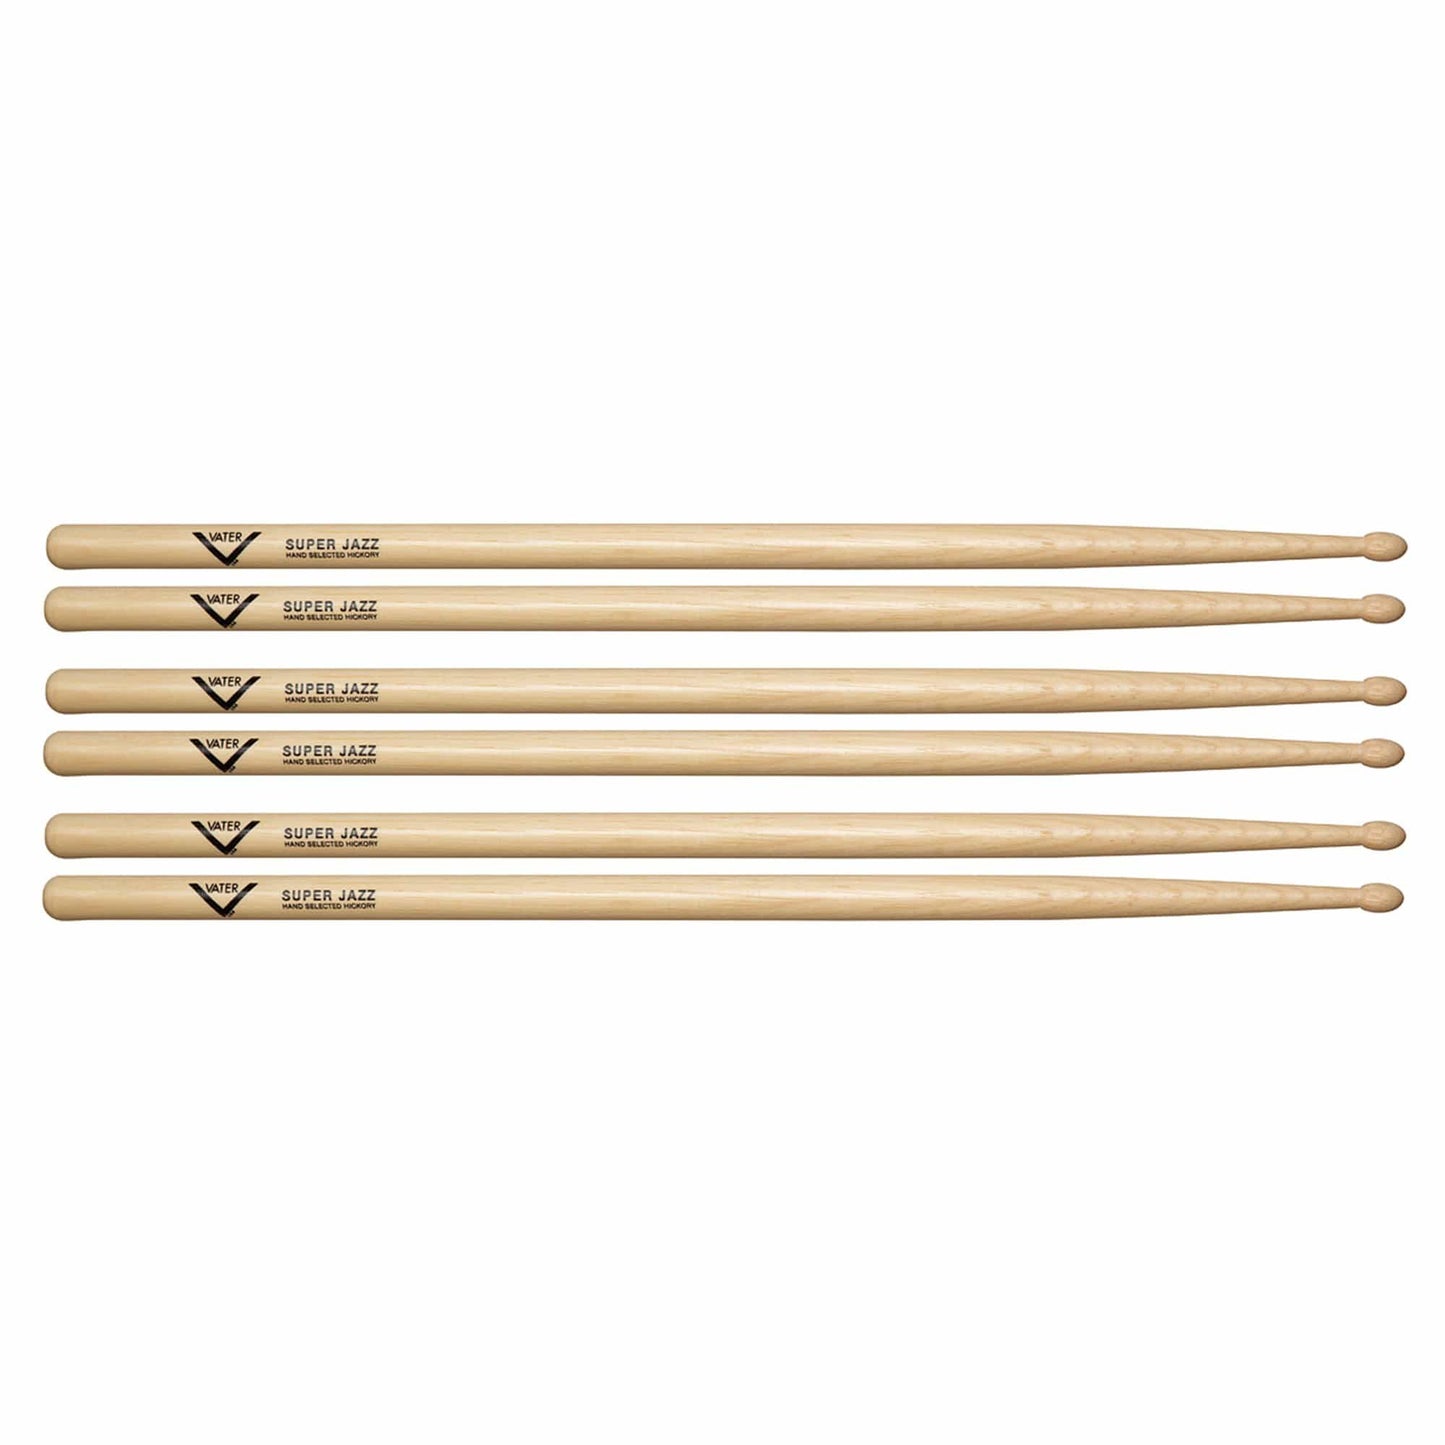 Vater Hickory Super Jazz Wood Tip Drum Sticks (3 Pair Bundle) Drums and Percussion / Parts and Accessories / Drum Sticks and Mallets